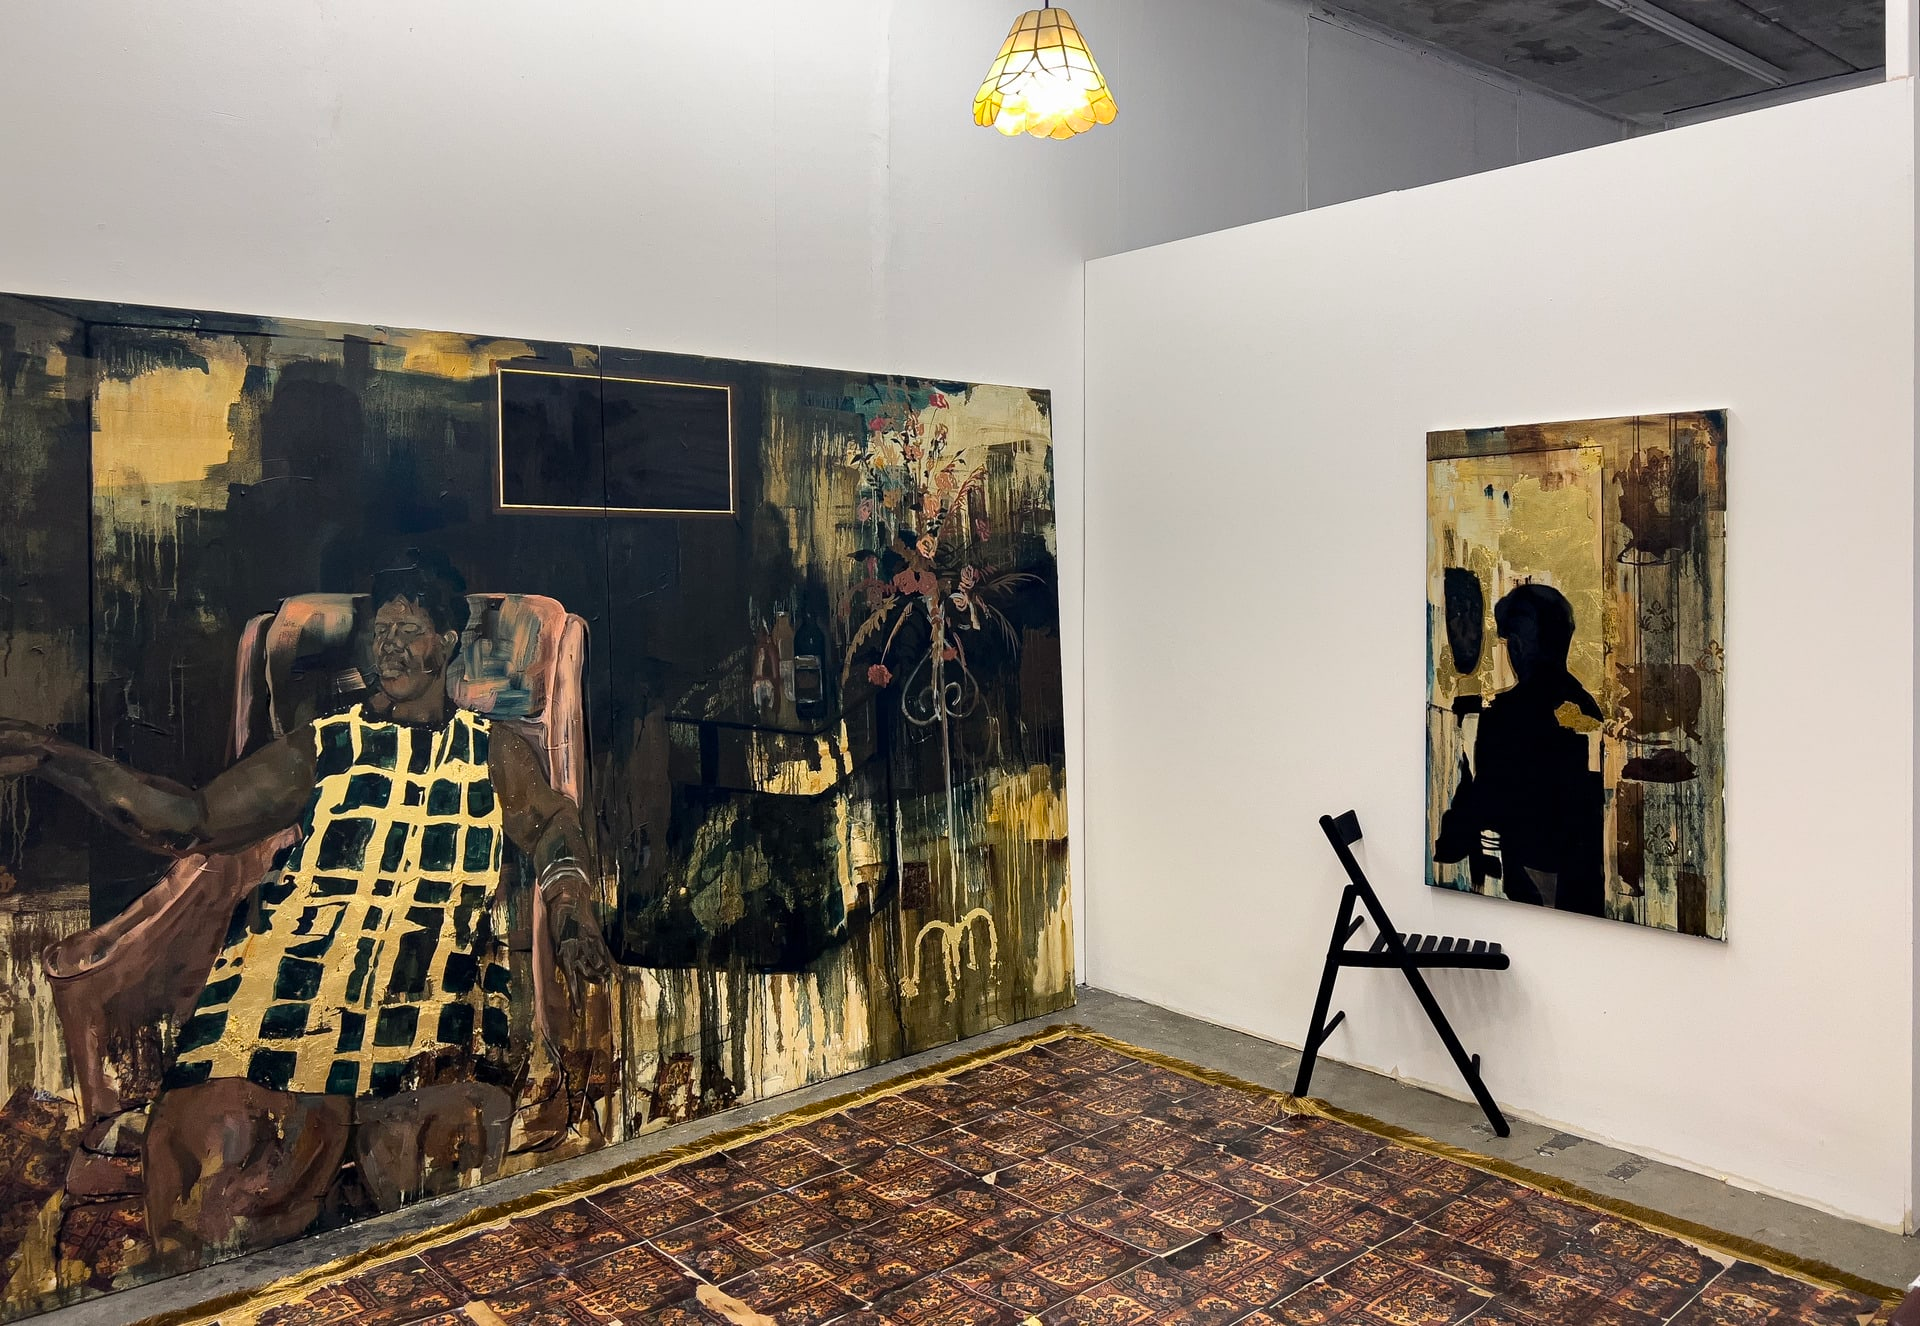 Photograph of a corner of a gallery. On the walls are a large painting of a black woman in an armchair, and a smaller painting featuring a silhouette. Half of a chair is emerging from the wall beneath the painting.